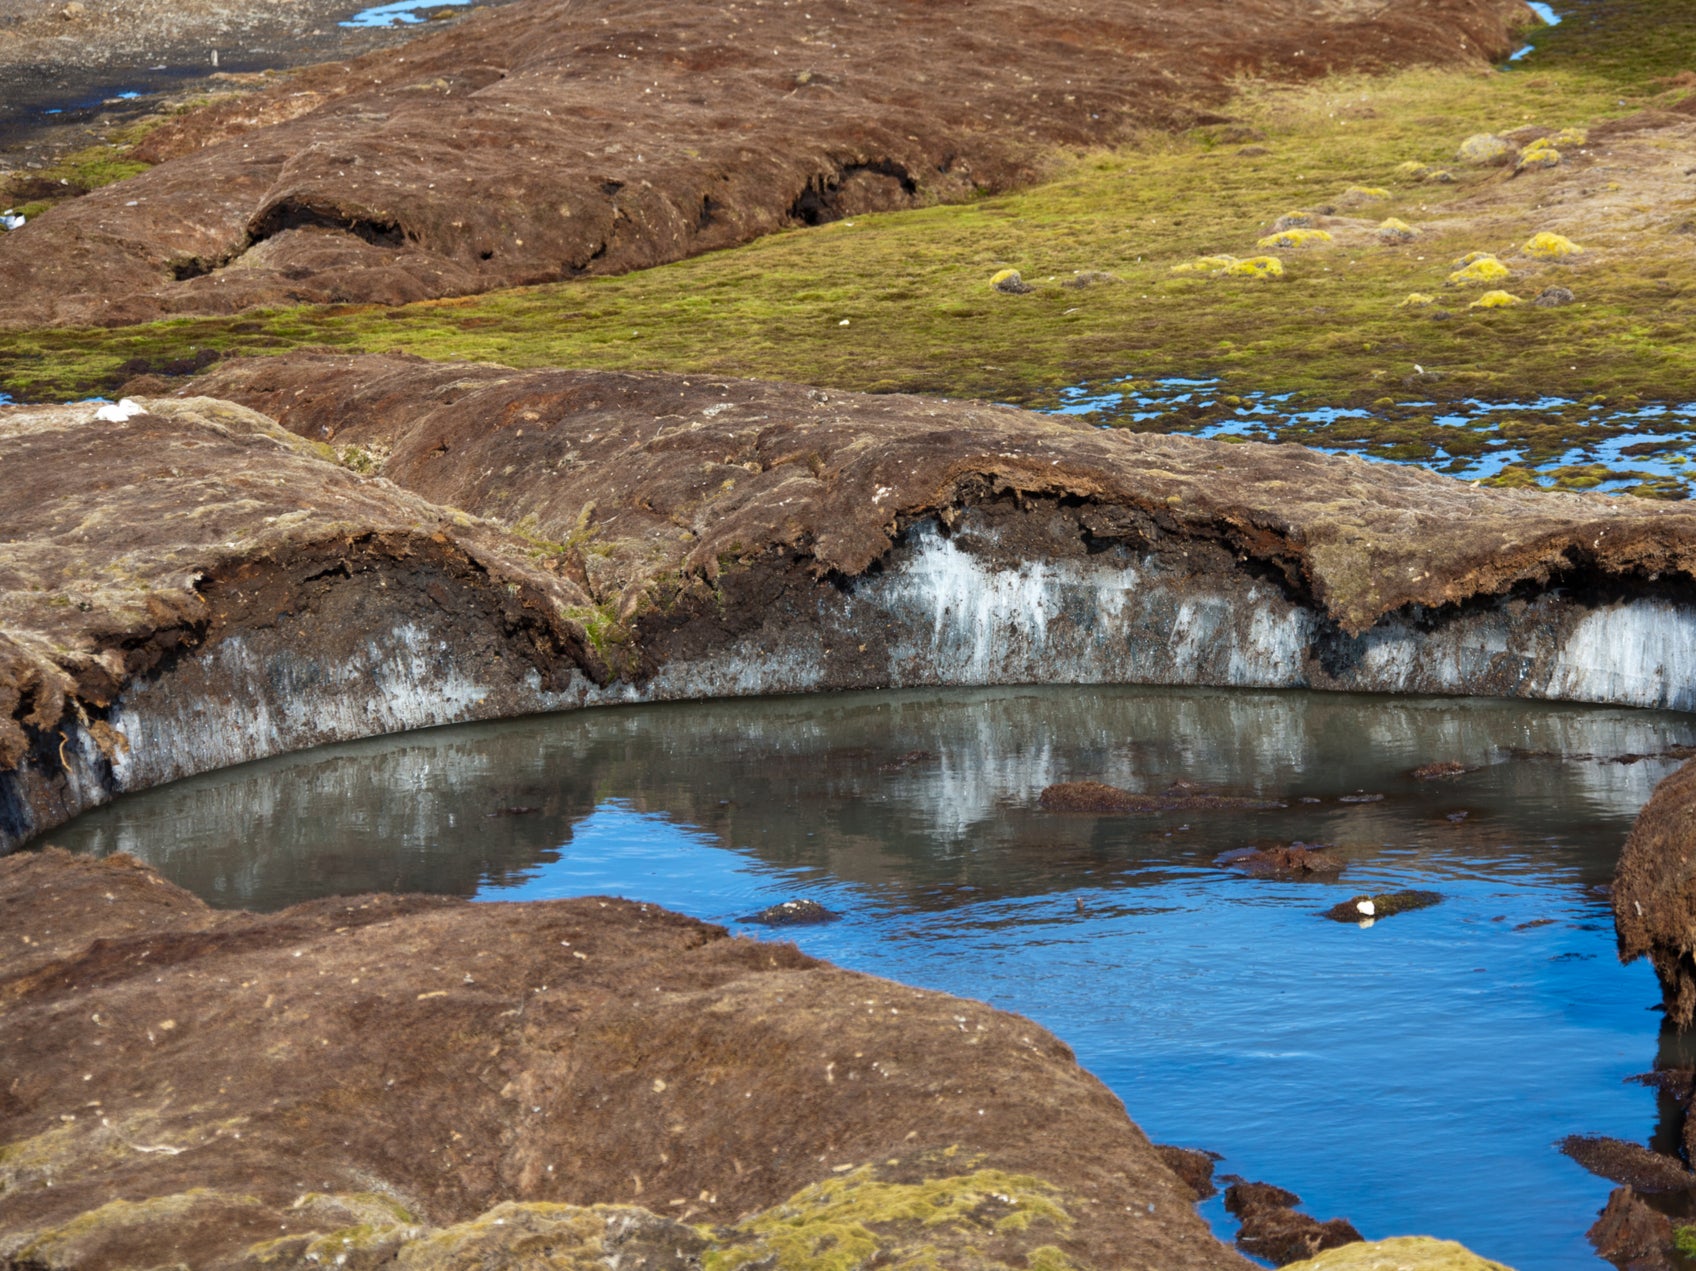 Melting permafrost peatlands release methane and carbon into the atmosphere, increasing warming further